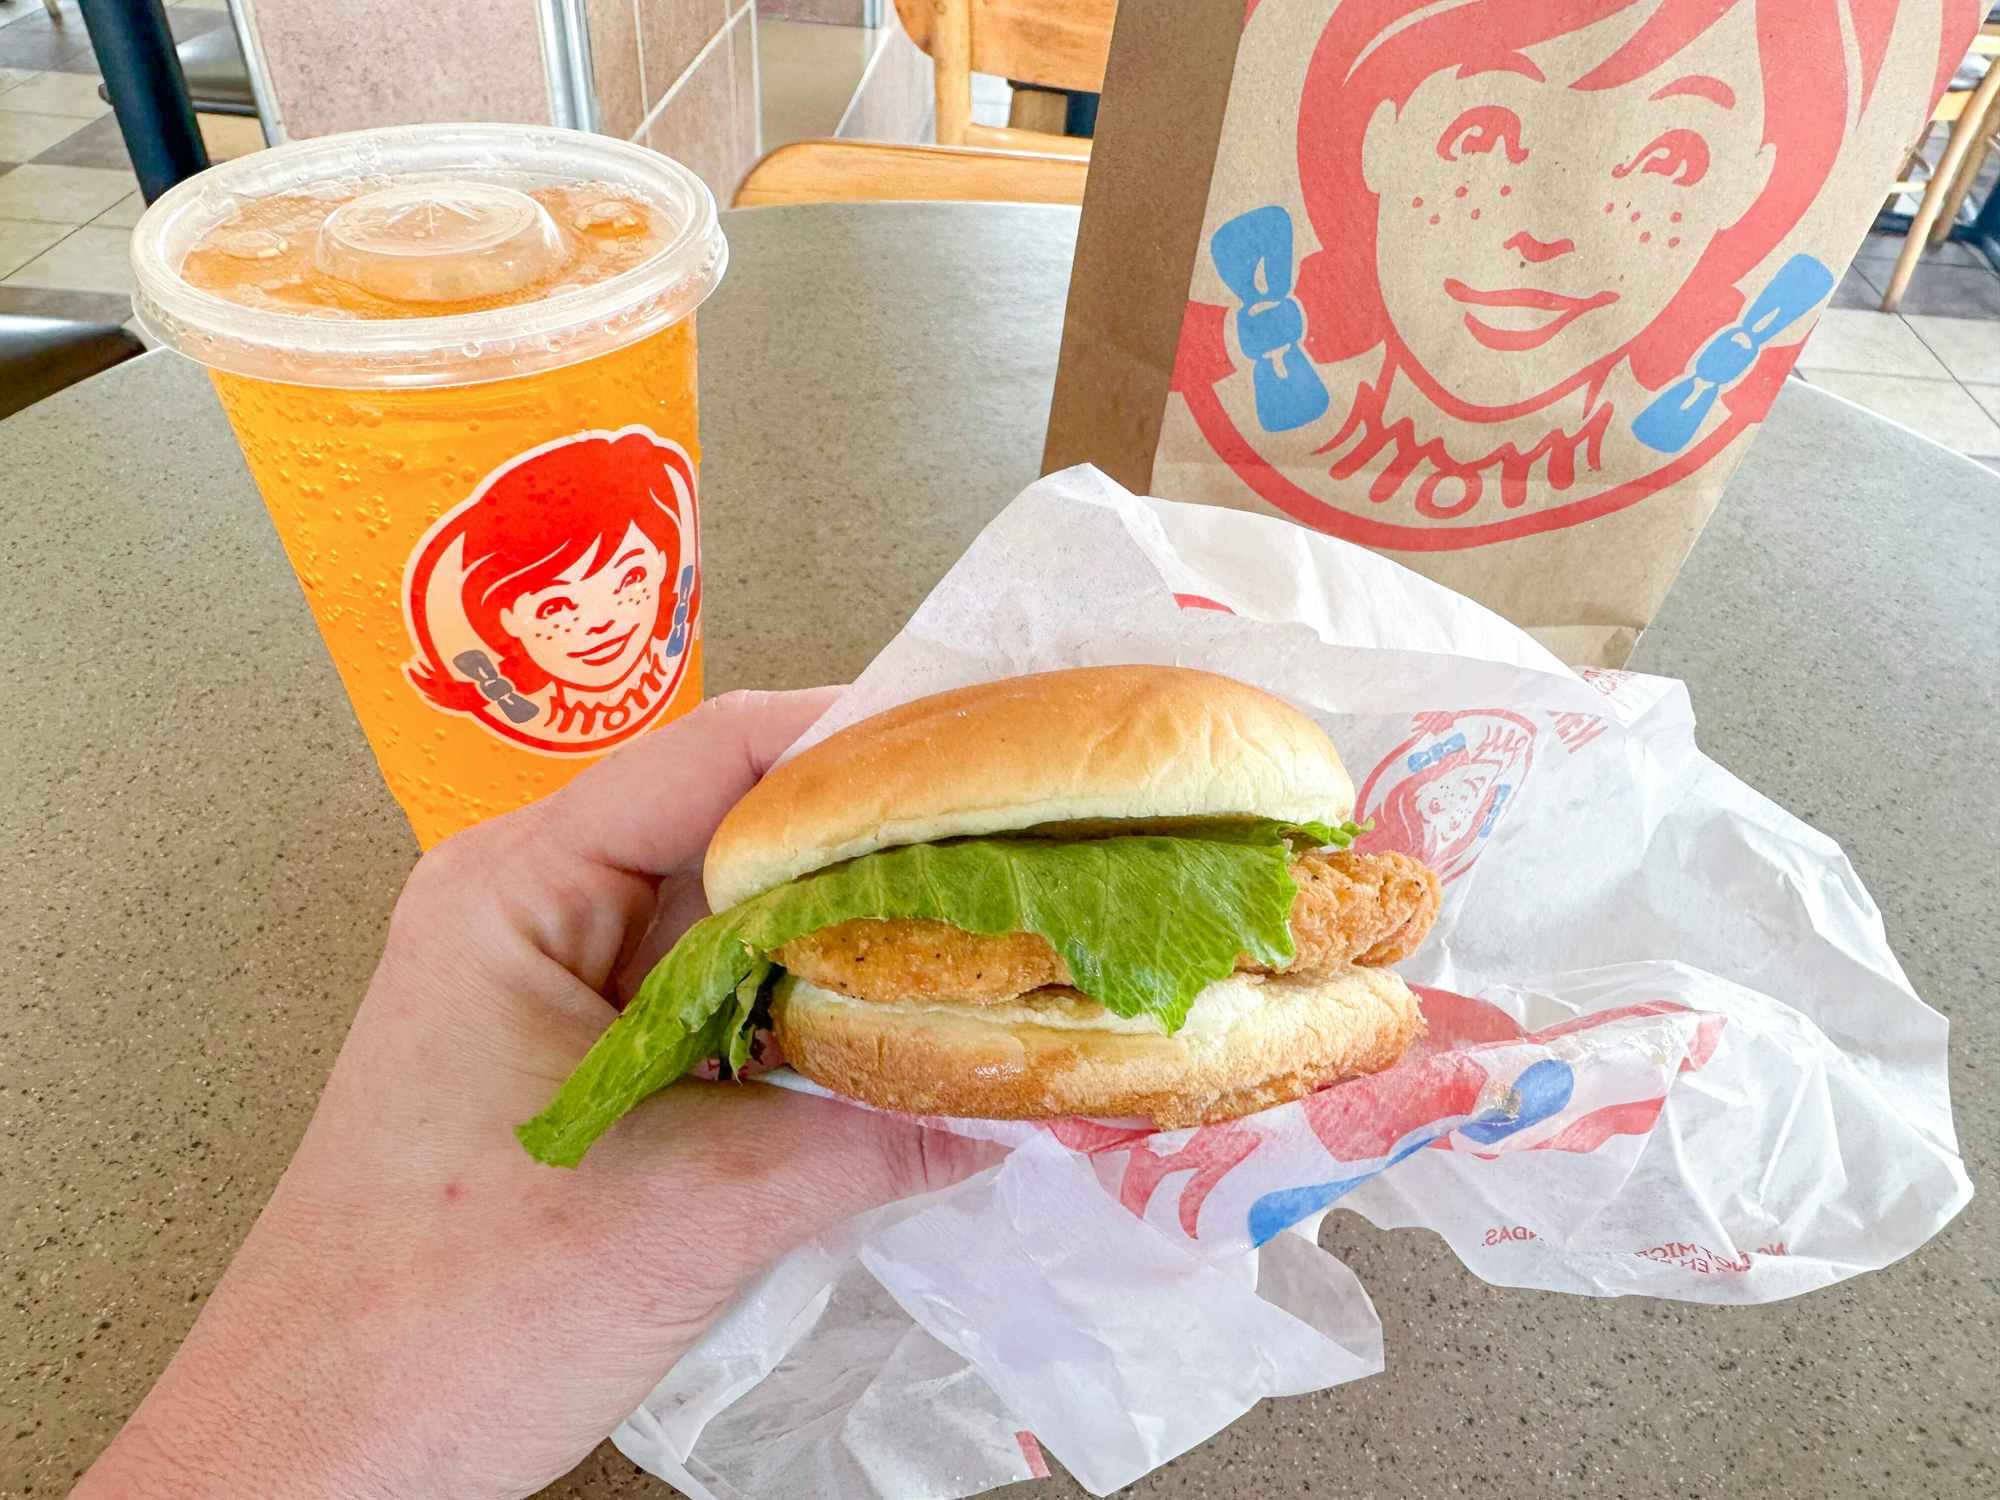 Someone holding a Crispy Chicken Sandwich at Wendy's in front of a drink and bag